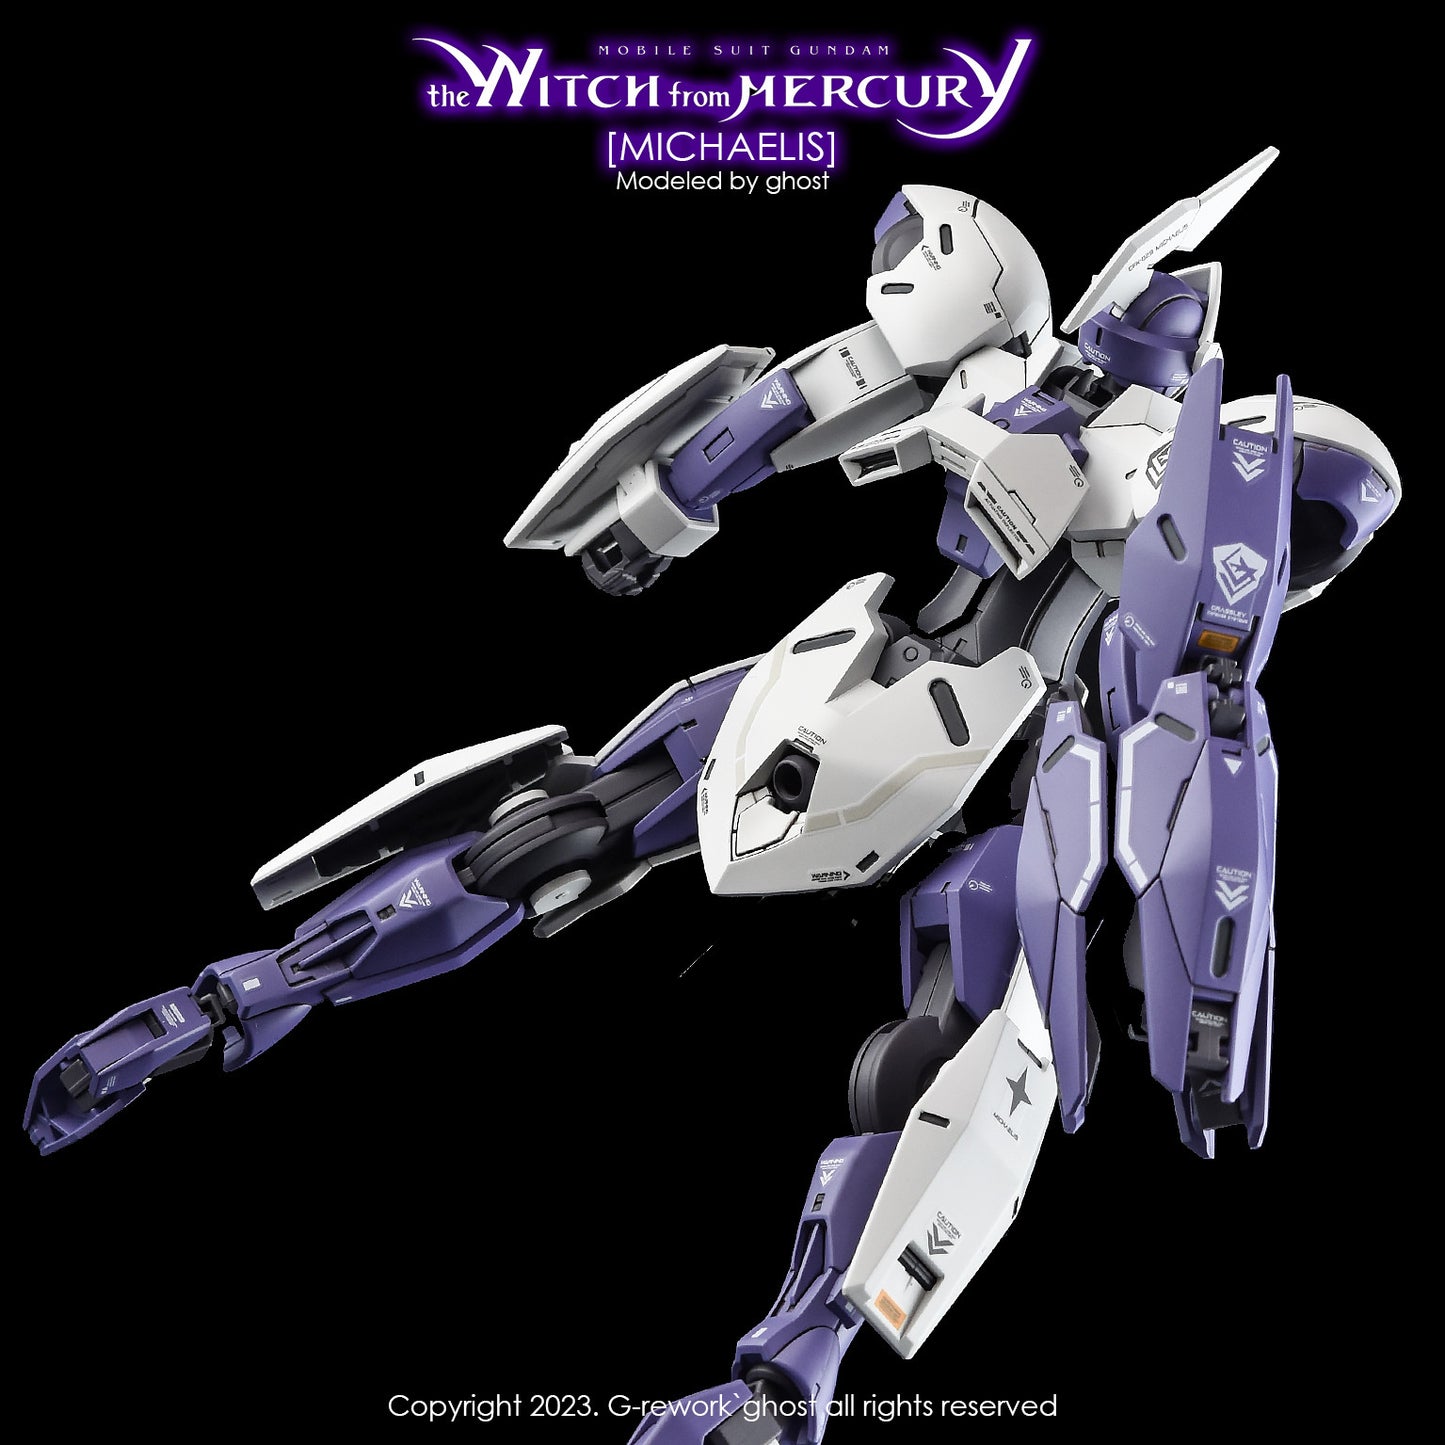 G-Rework [HG] MICHAELIS [witch from mercury] water decal